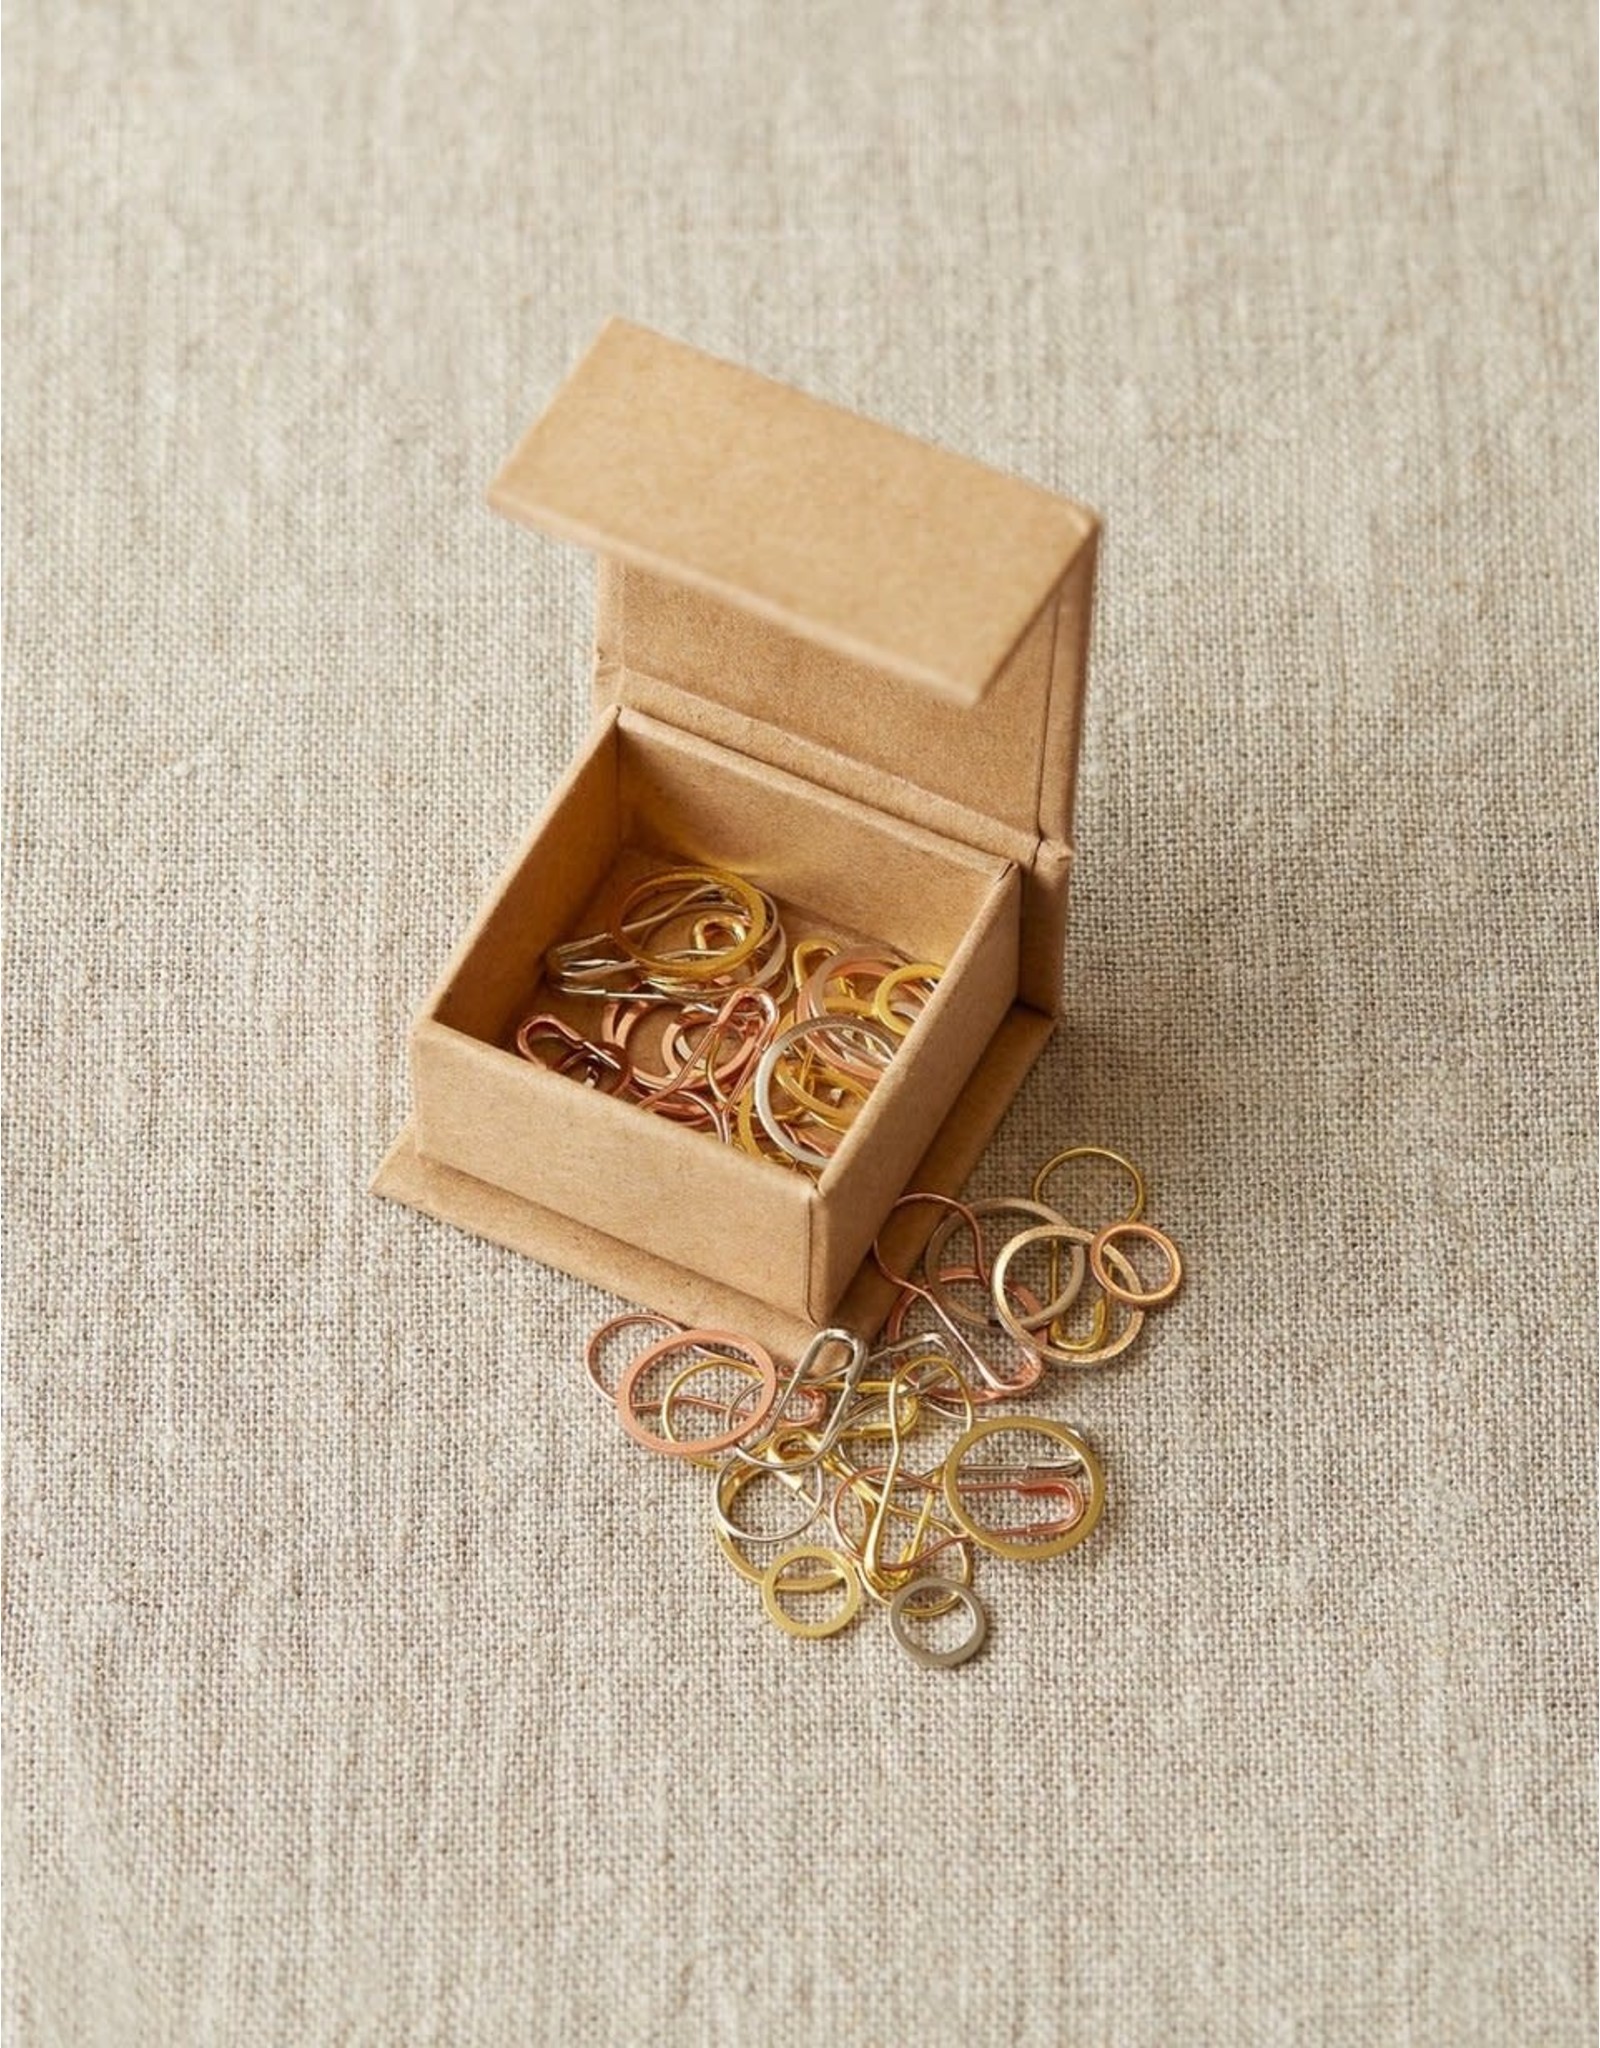 Precious Metal Stitch Markers by Cocoknits